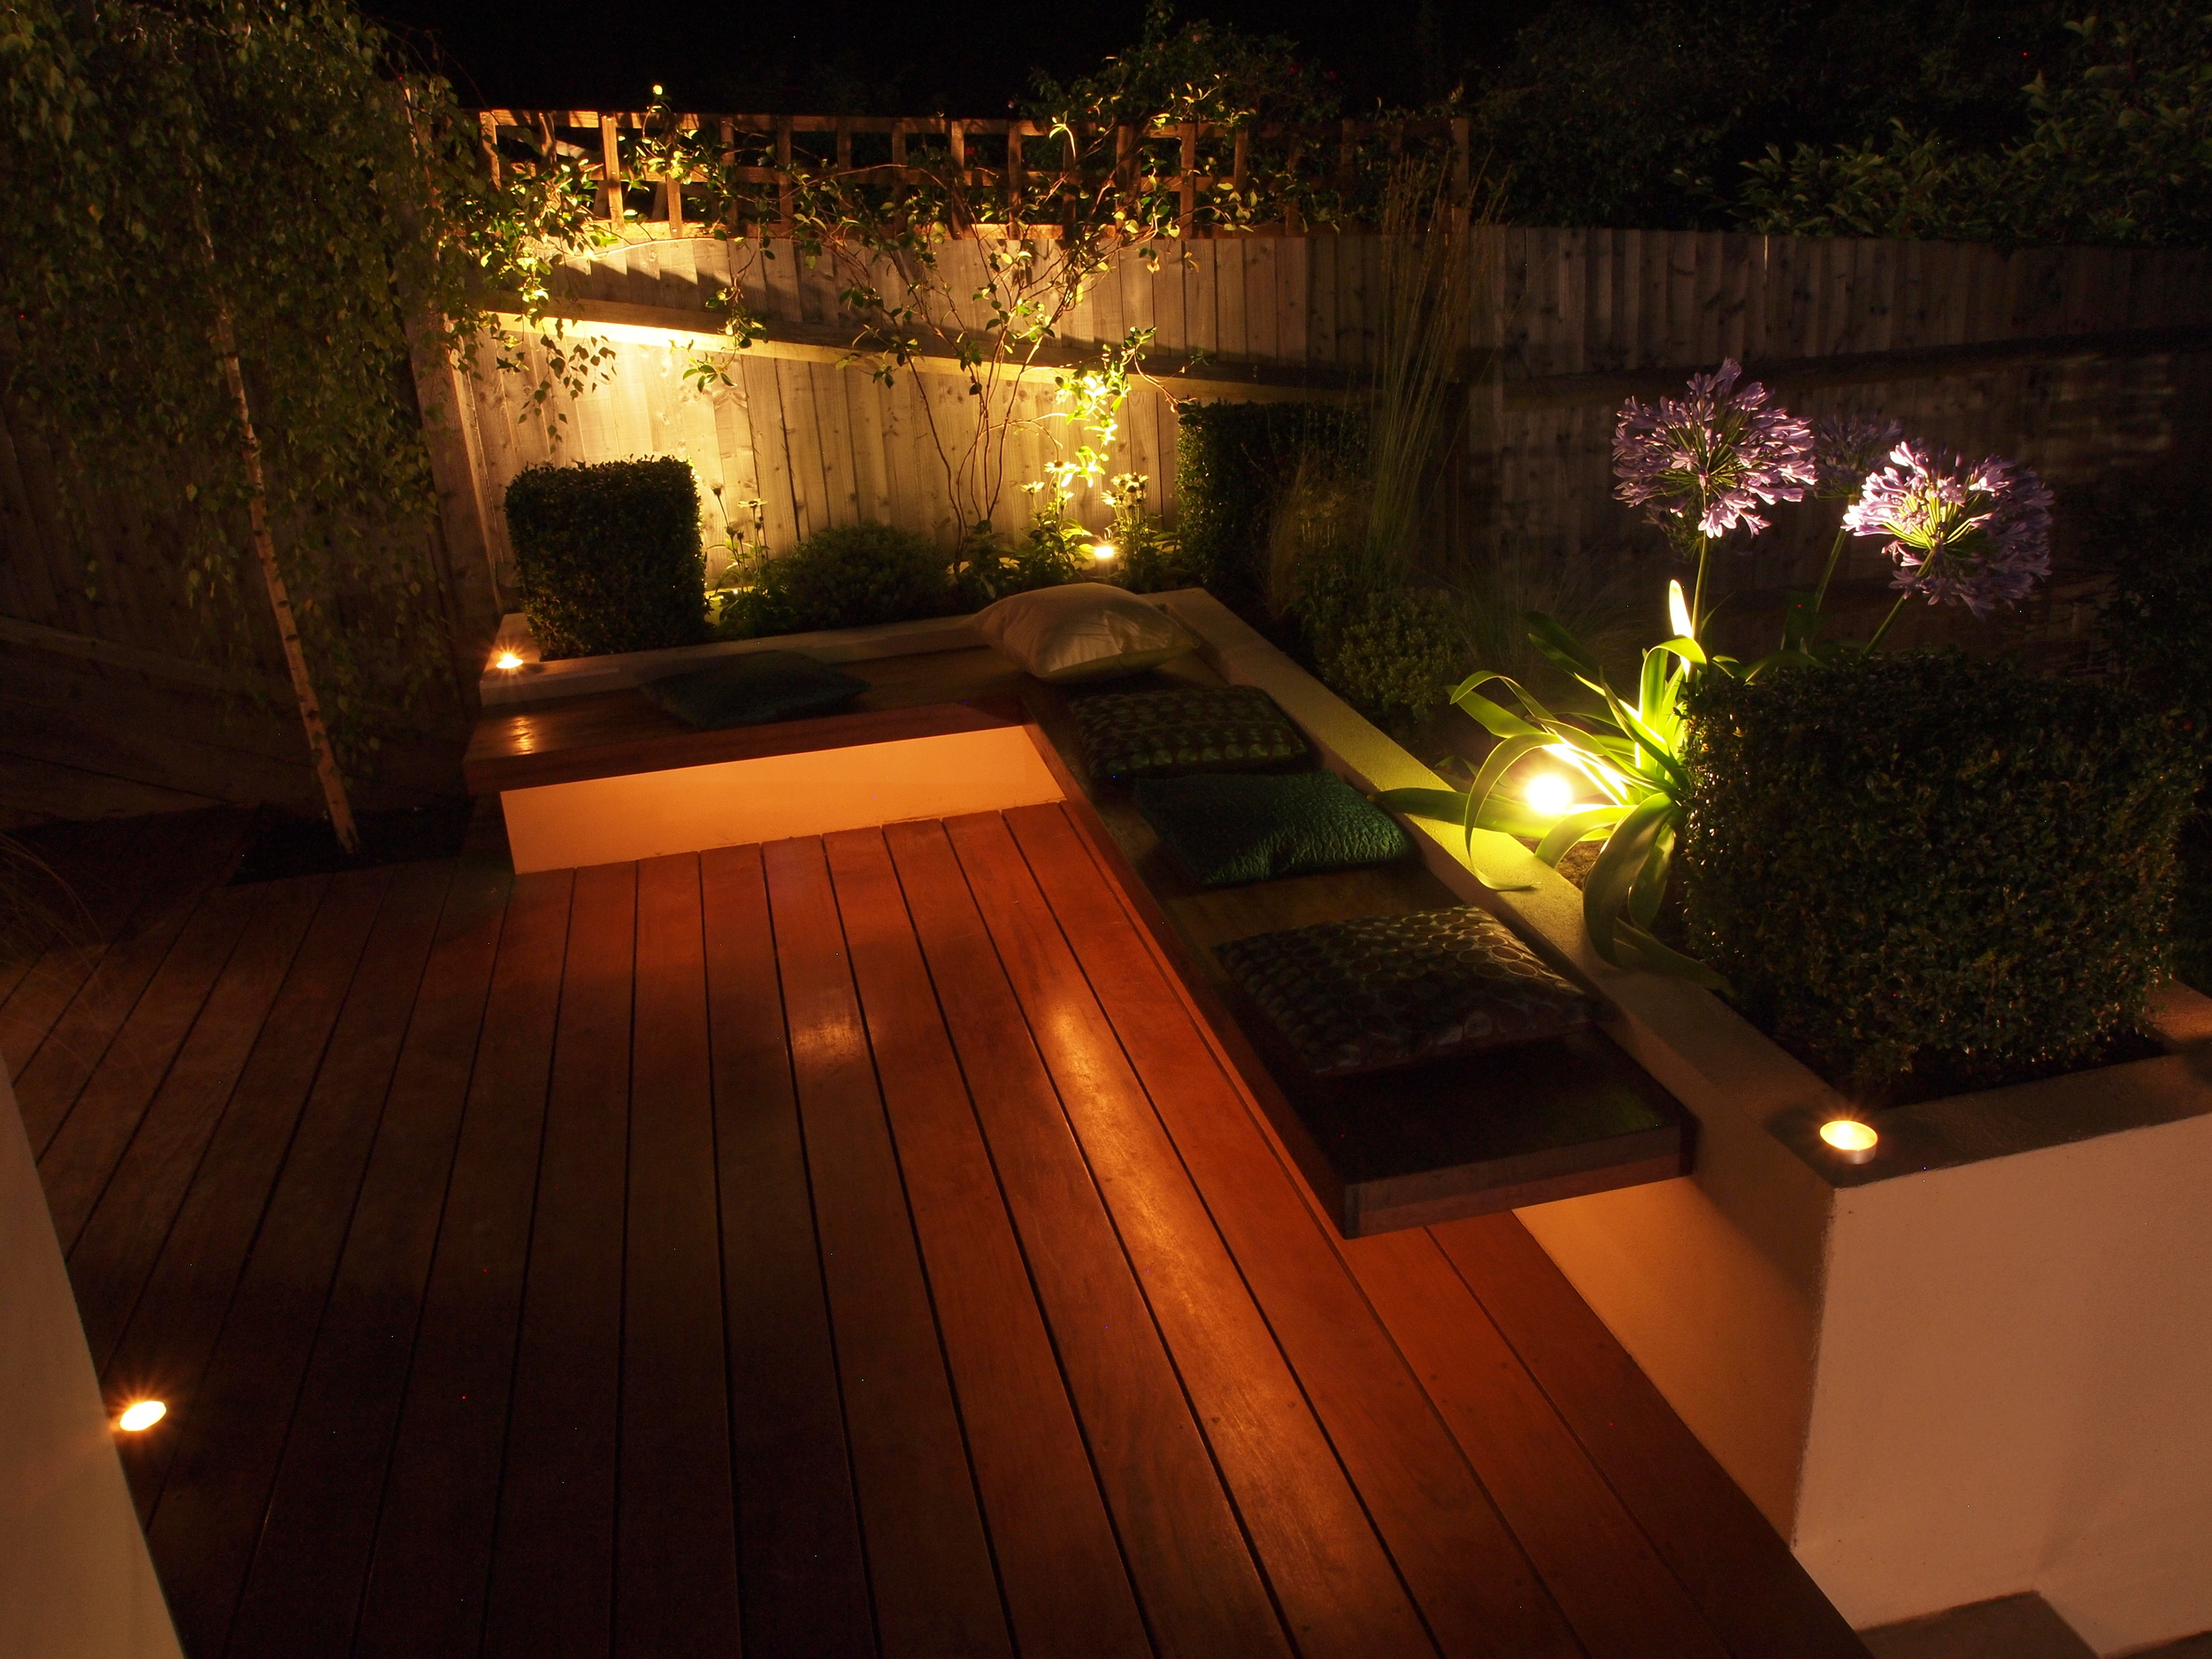 Seating area and border plants in garden makeover N10 at night